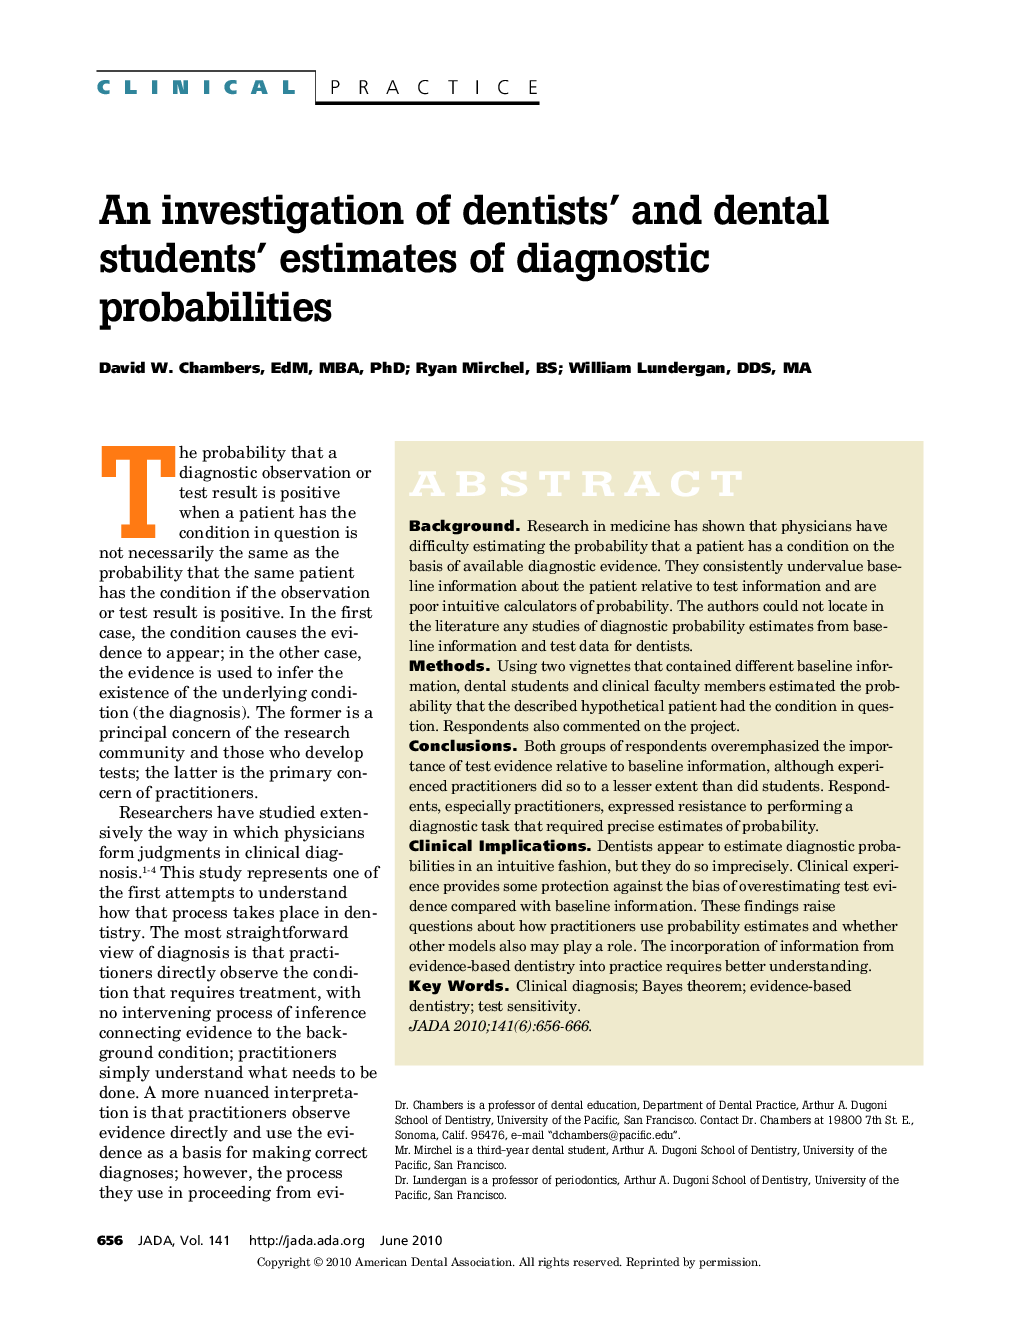 An Investigation of Dentists' and Dental Students' Estimates of Diagnostic Probabilities 